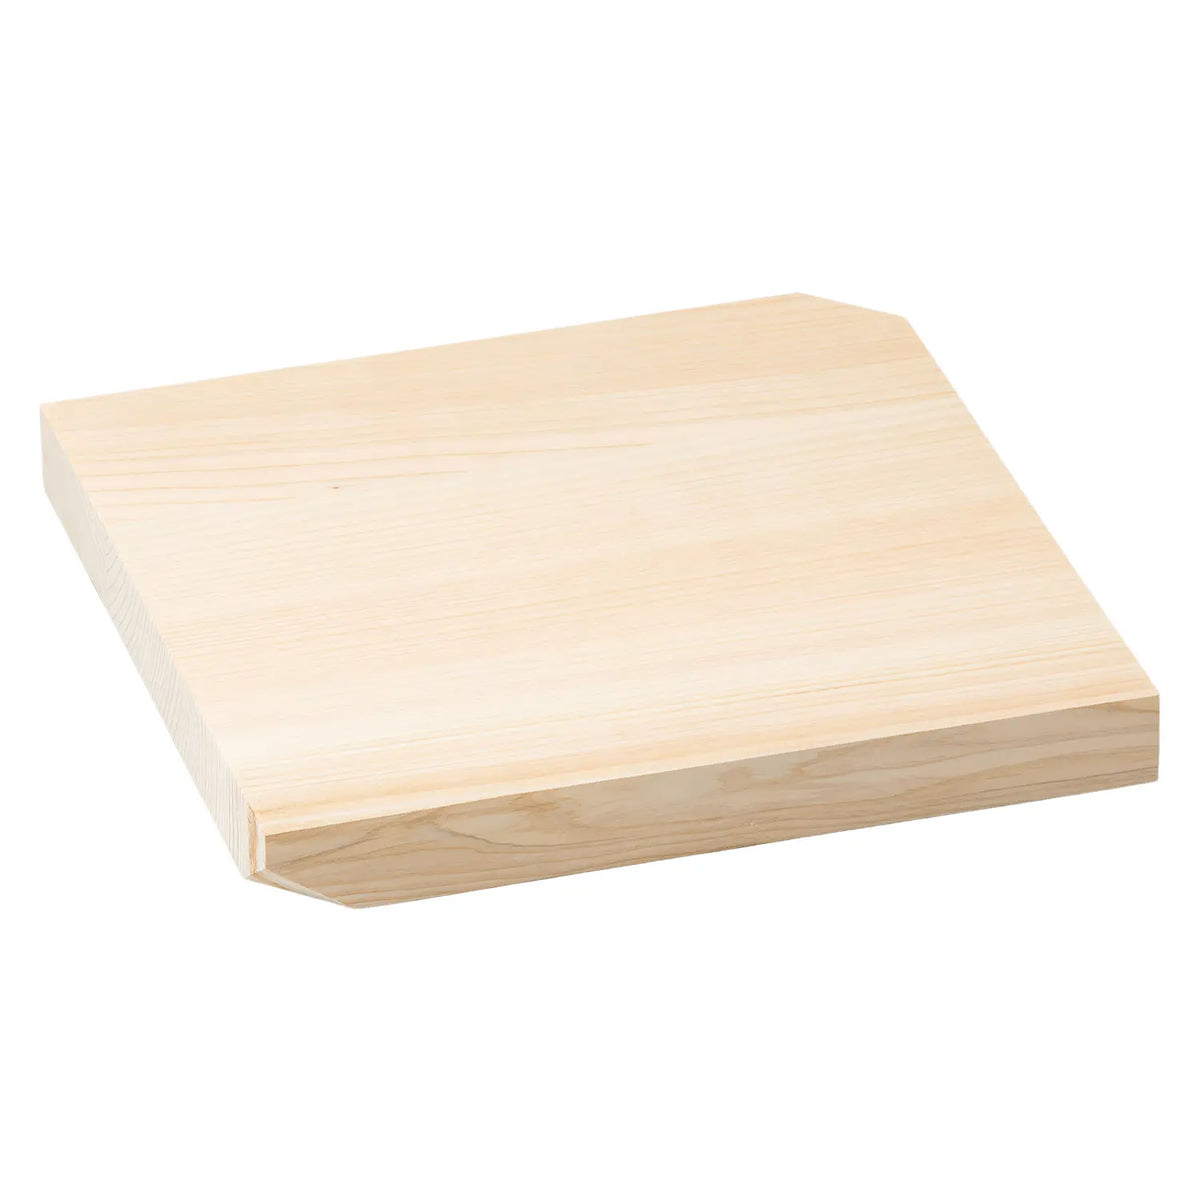 Yamacoh Kiso Hinoki Cypress Wooden Cutting Board Special Selection